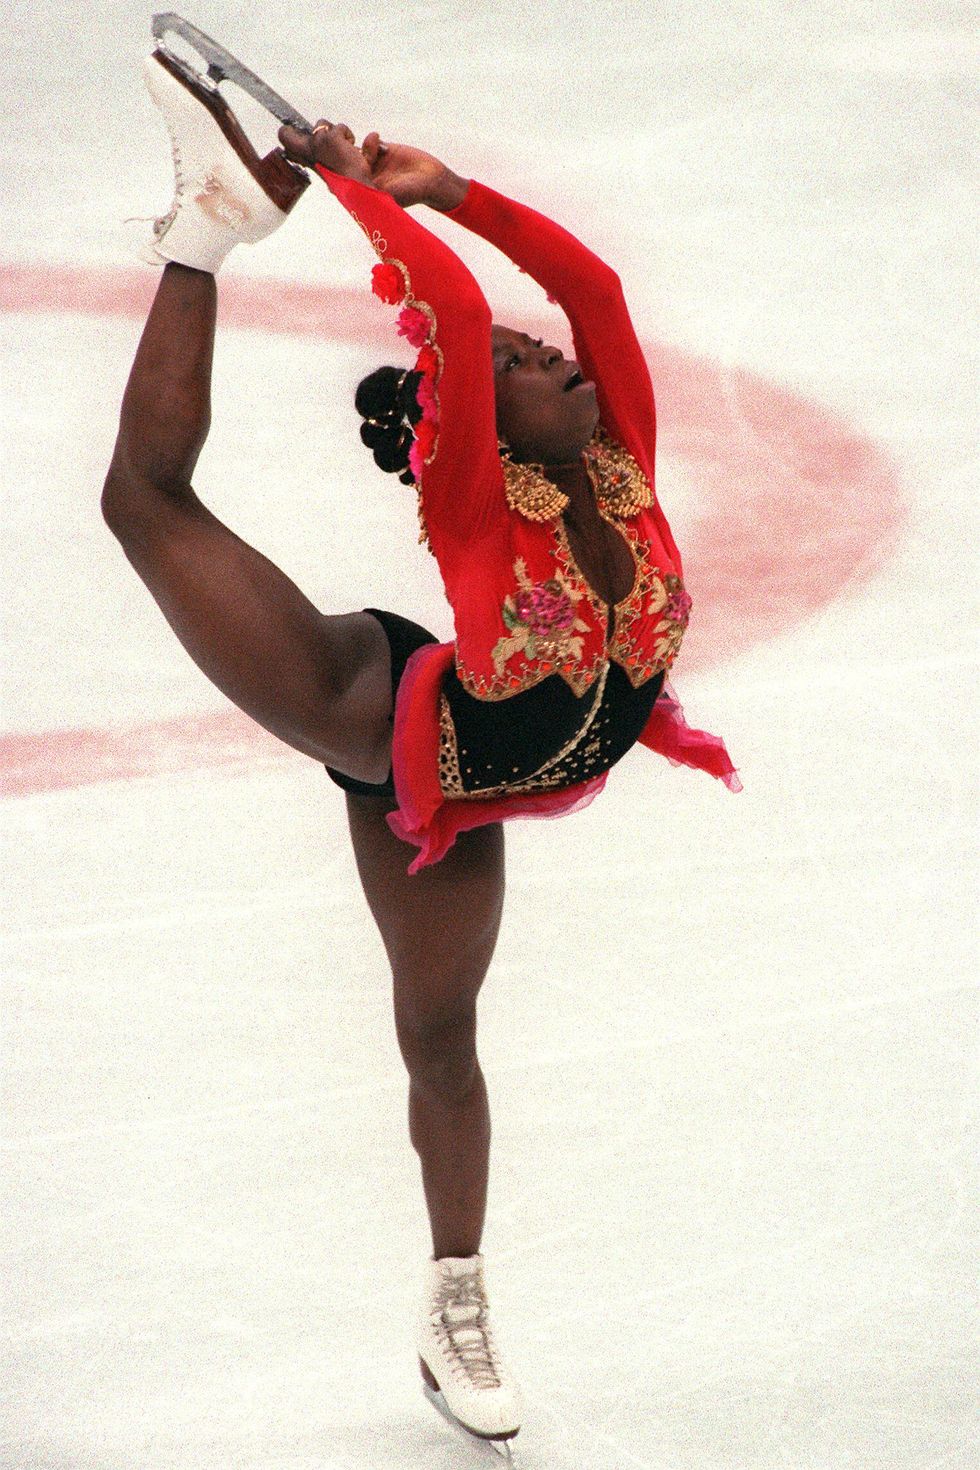 Photos: Most Daring Figure-Skating Outfits, Dresses of All Time